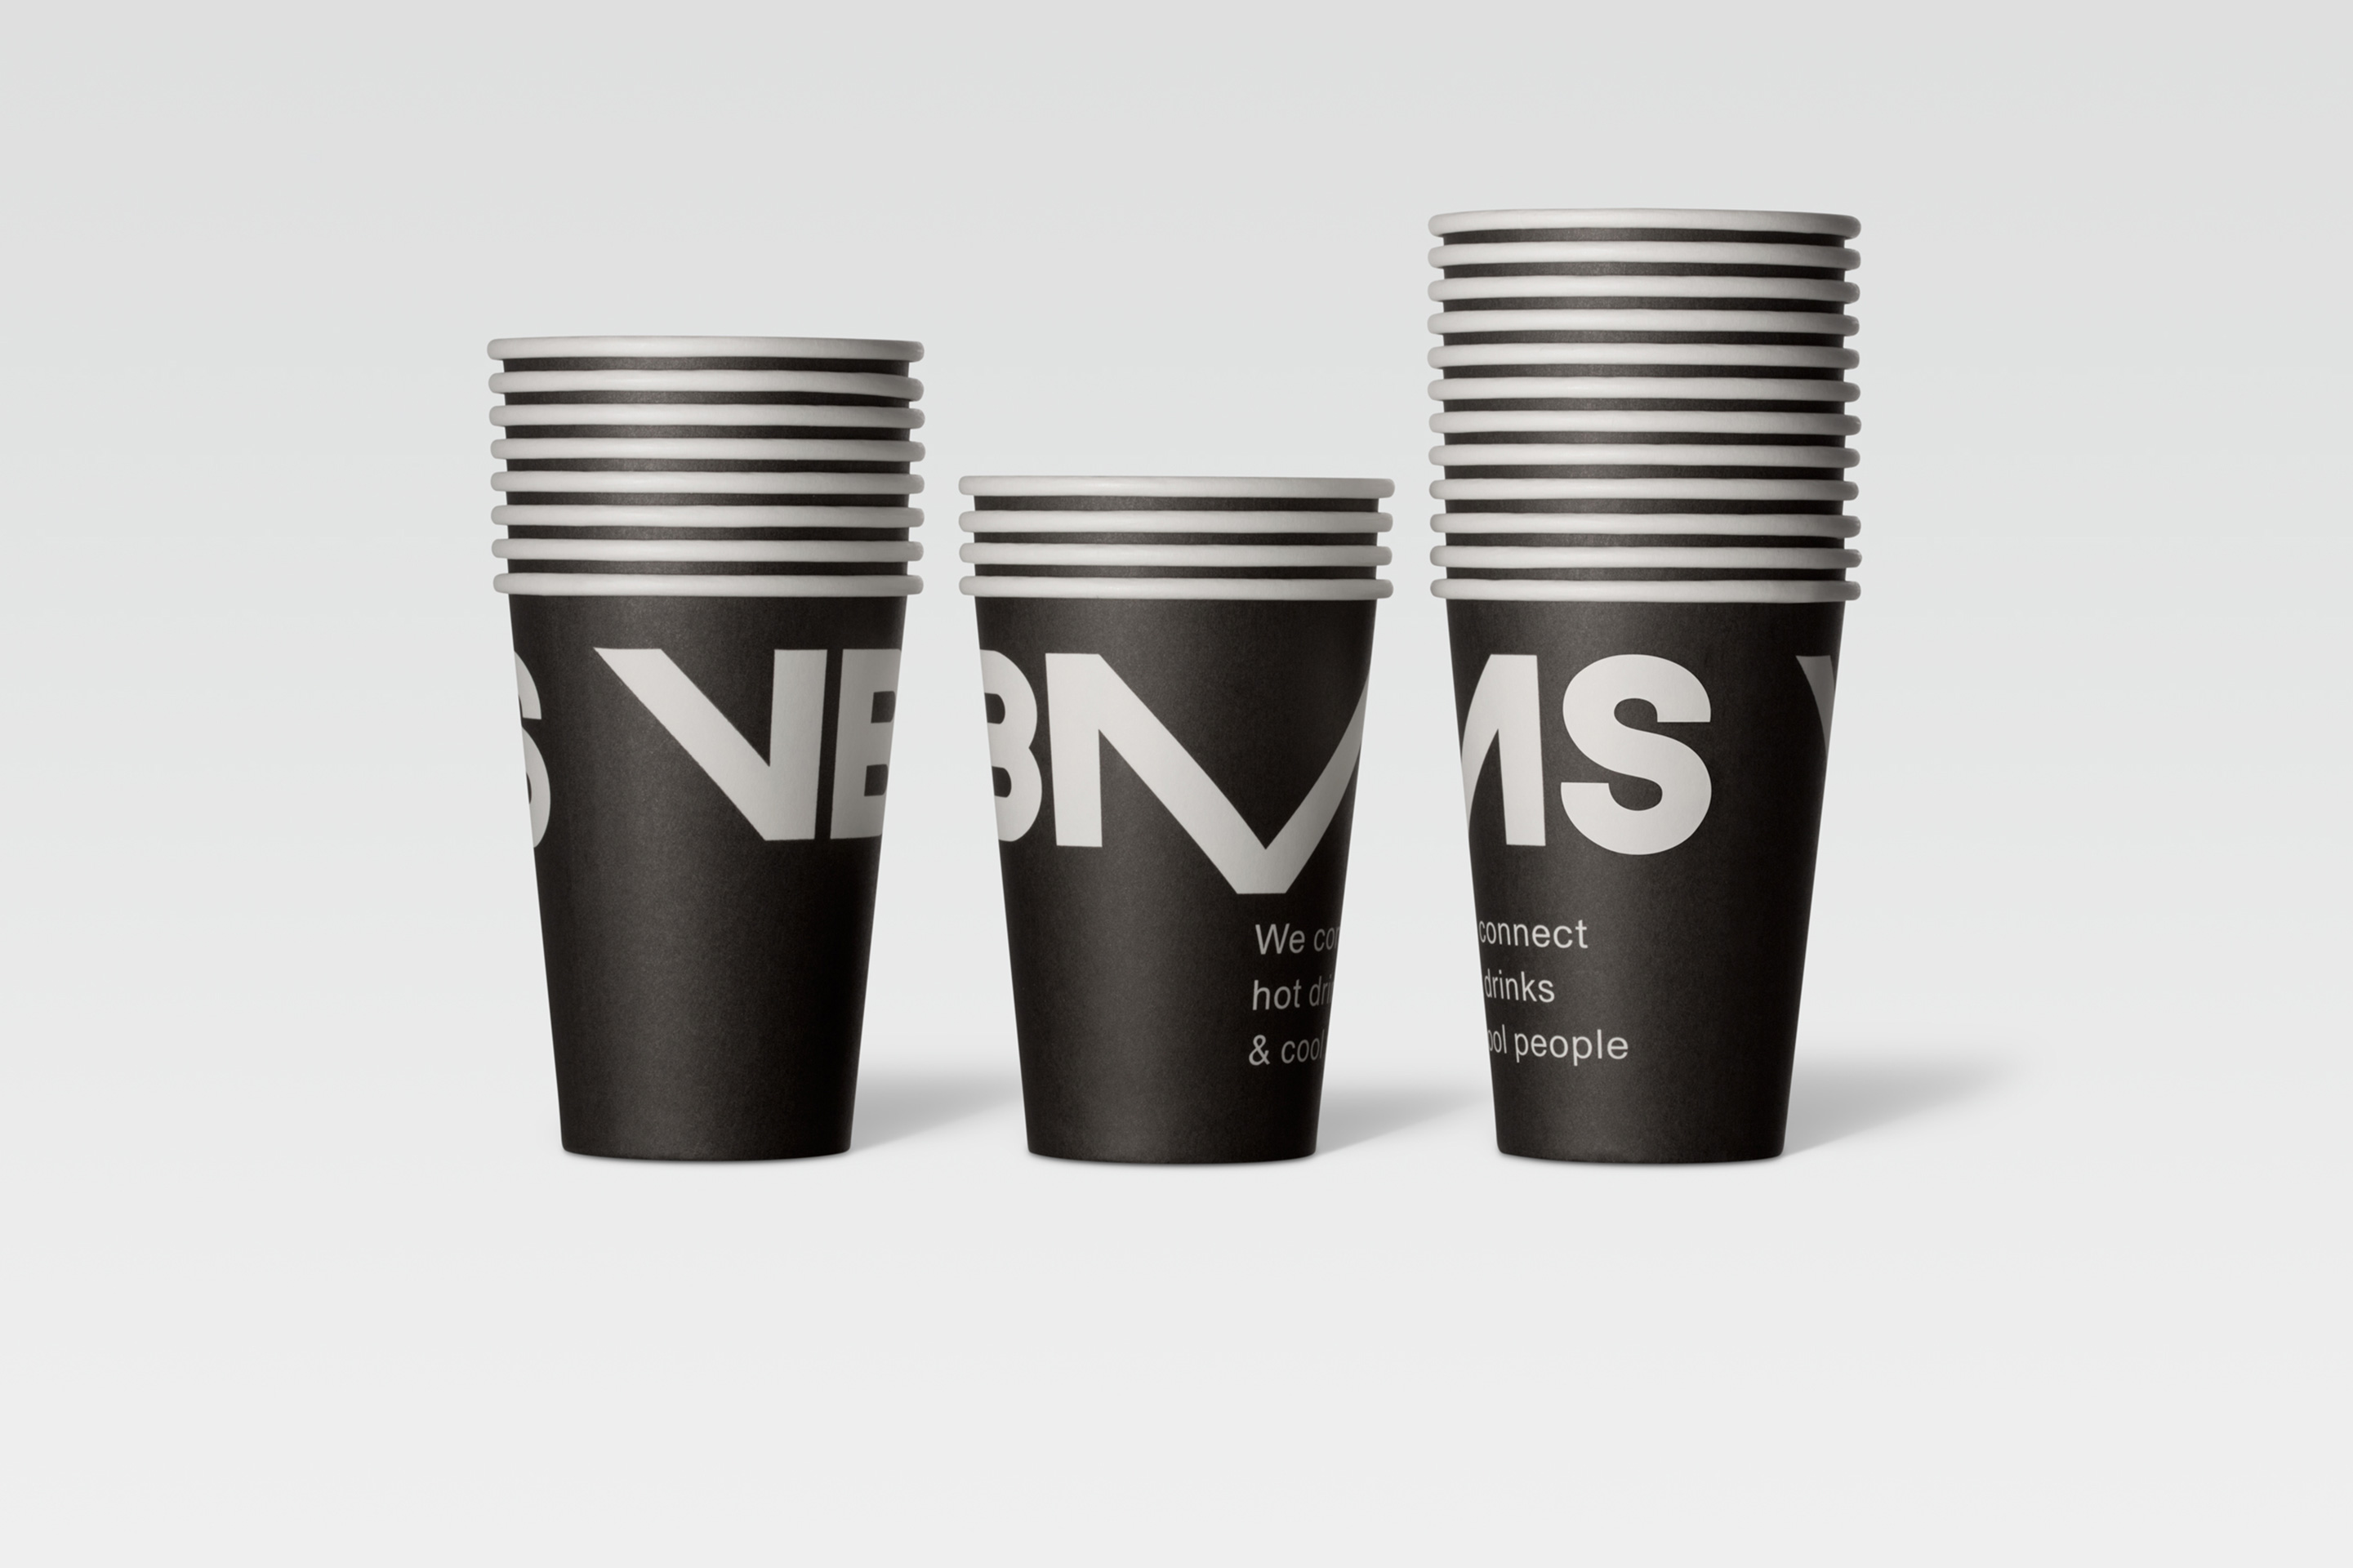 studio dumbar design visual brand identity for VBMS expert in offshore installations paper cup design